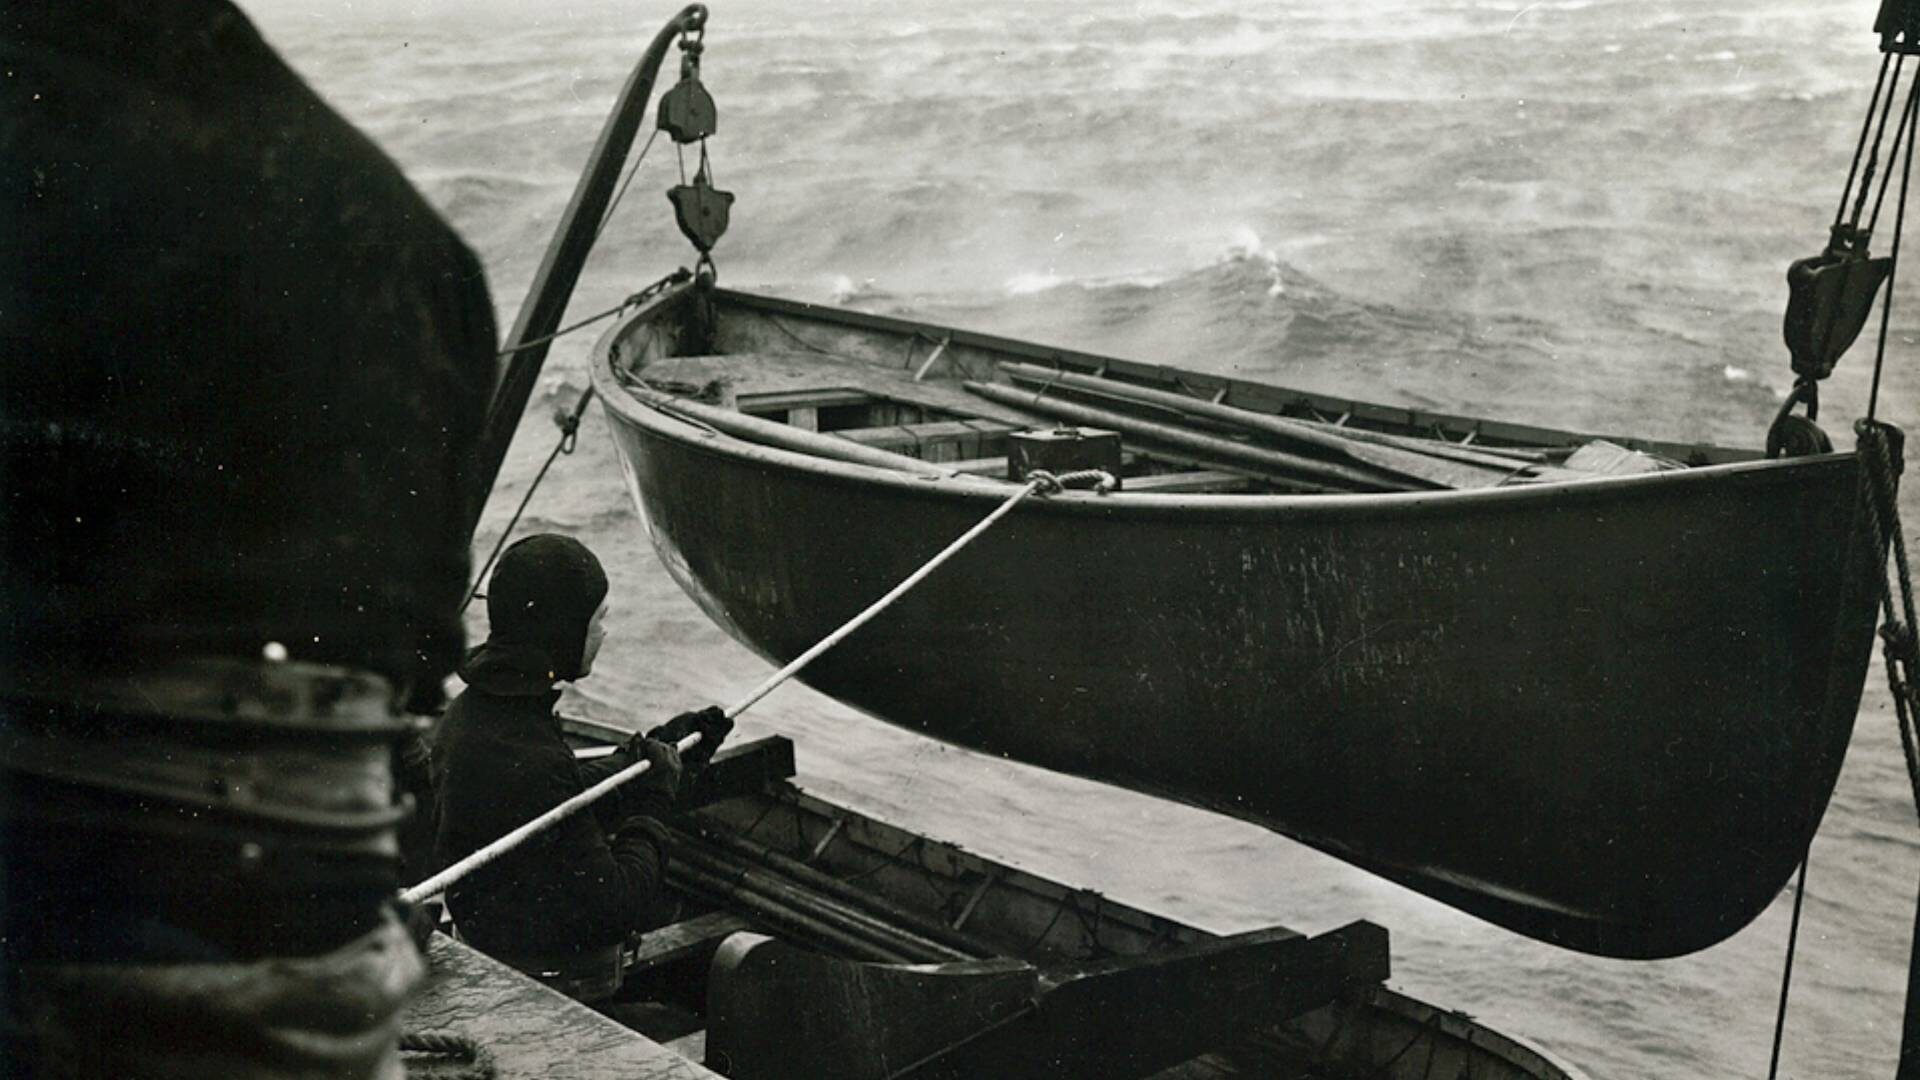 U.S. Soldiers check lifeboats on an Atlantic crossing to Northern Ireland in February 1942